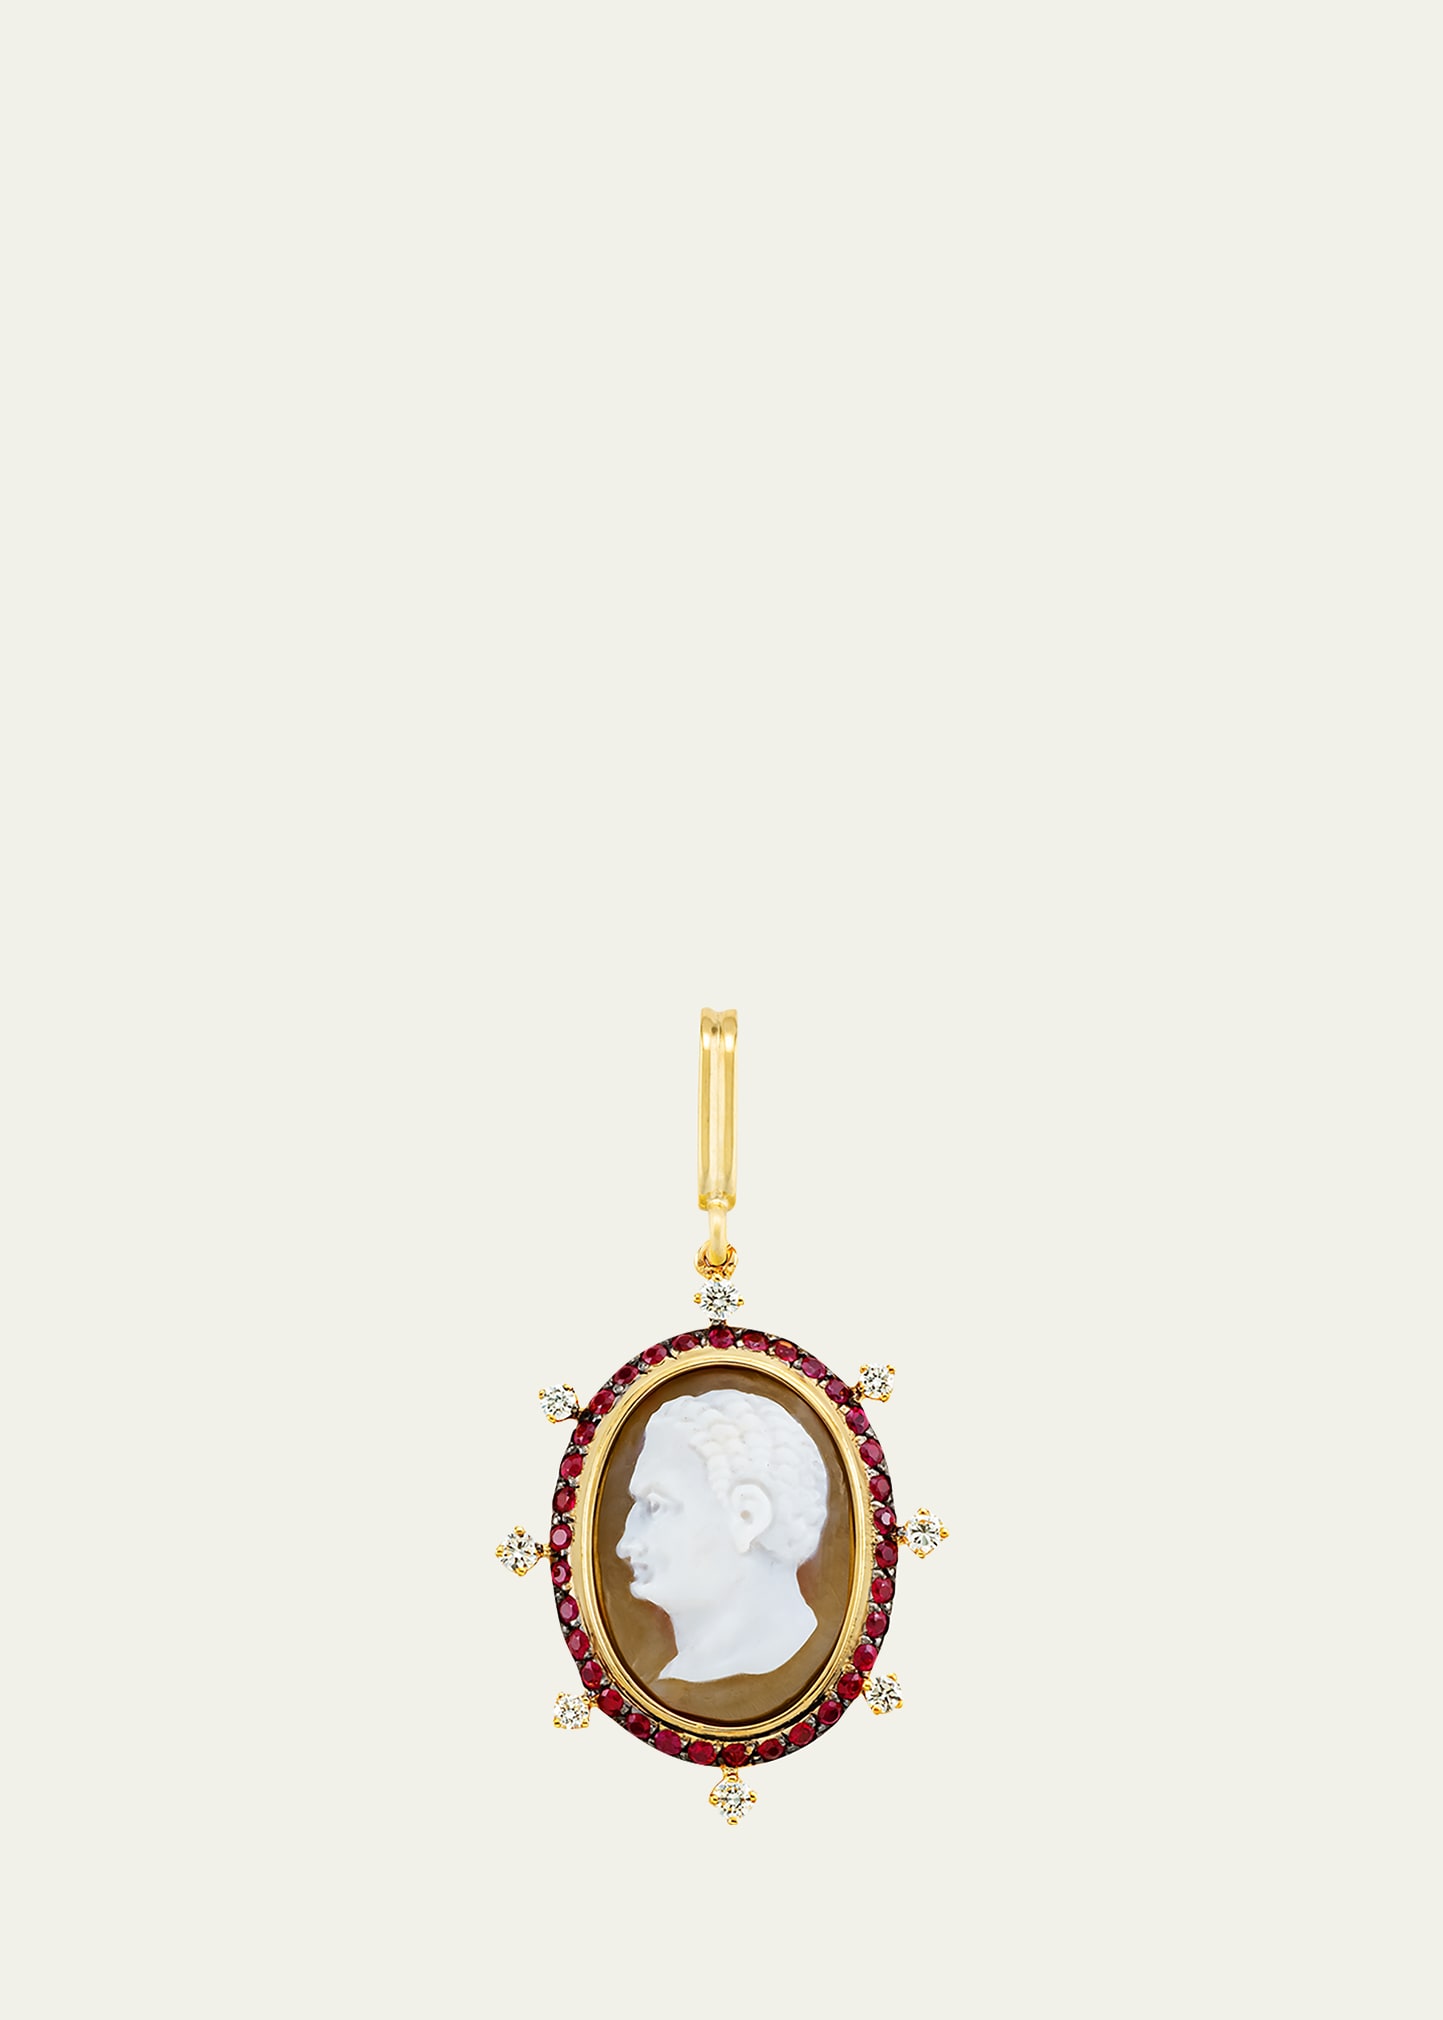 Mellerio 18k Yellow Gold Previous Cameo Charm With Shell, Diamonds And Rubies